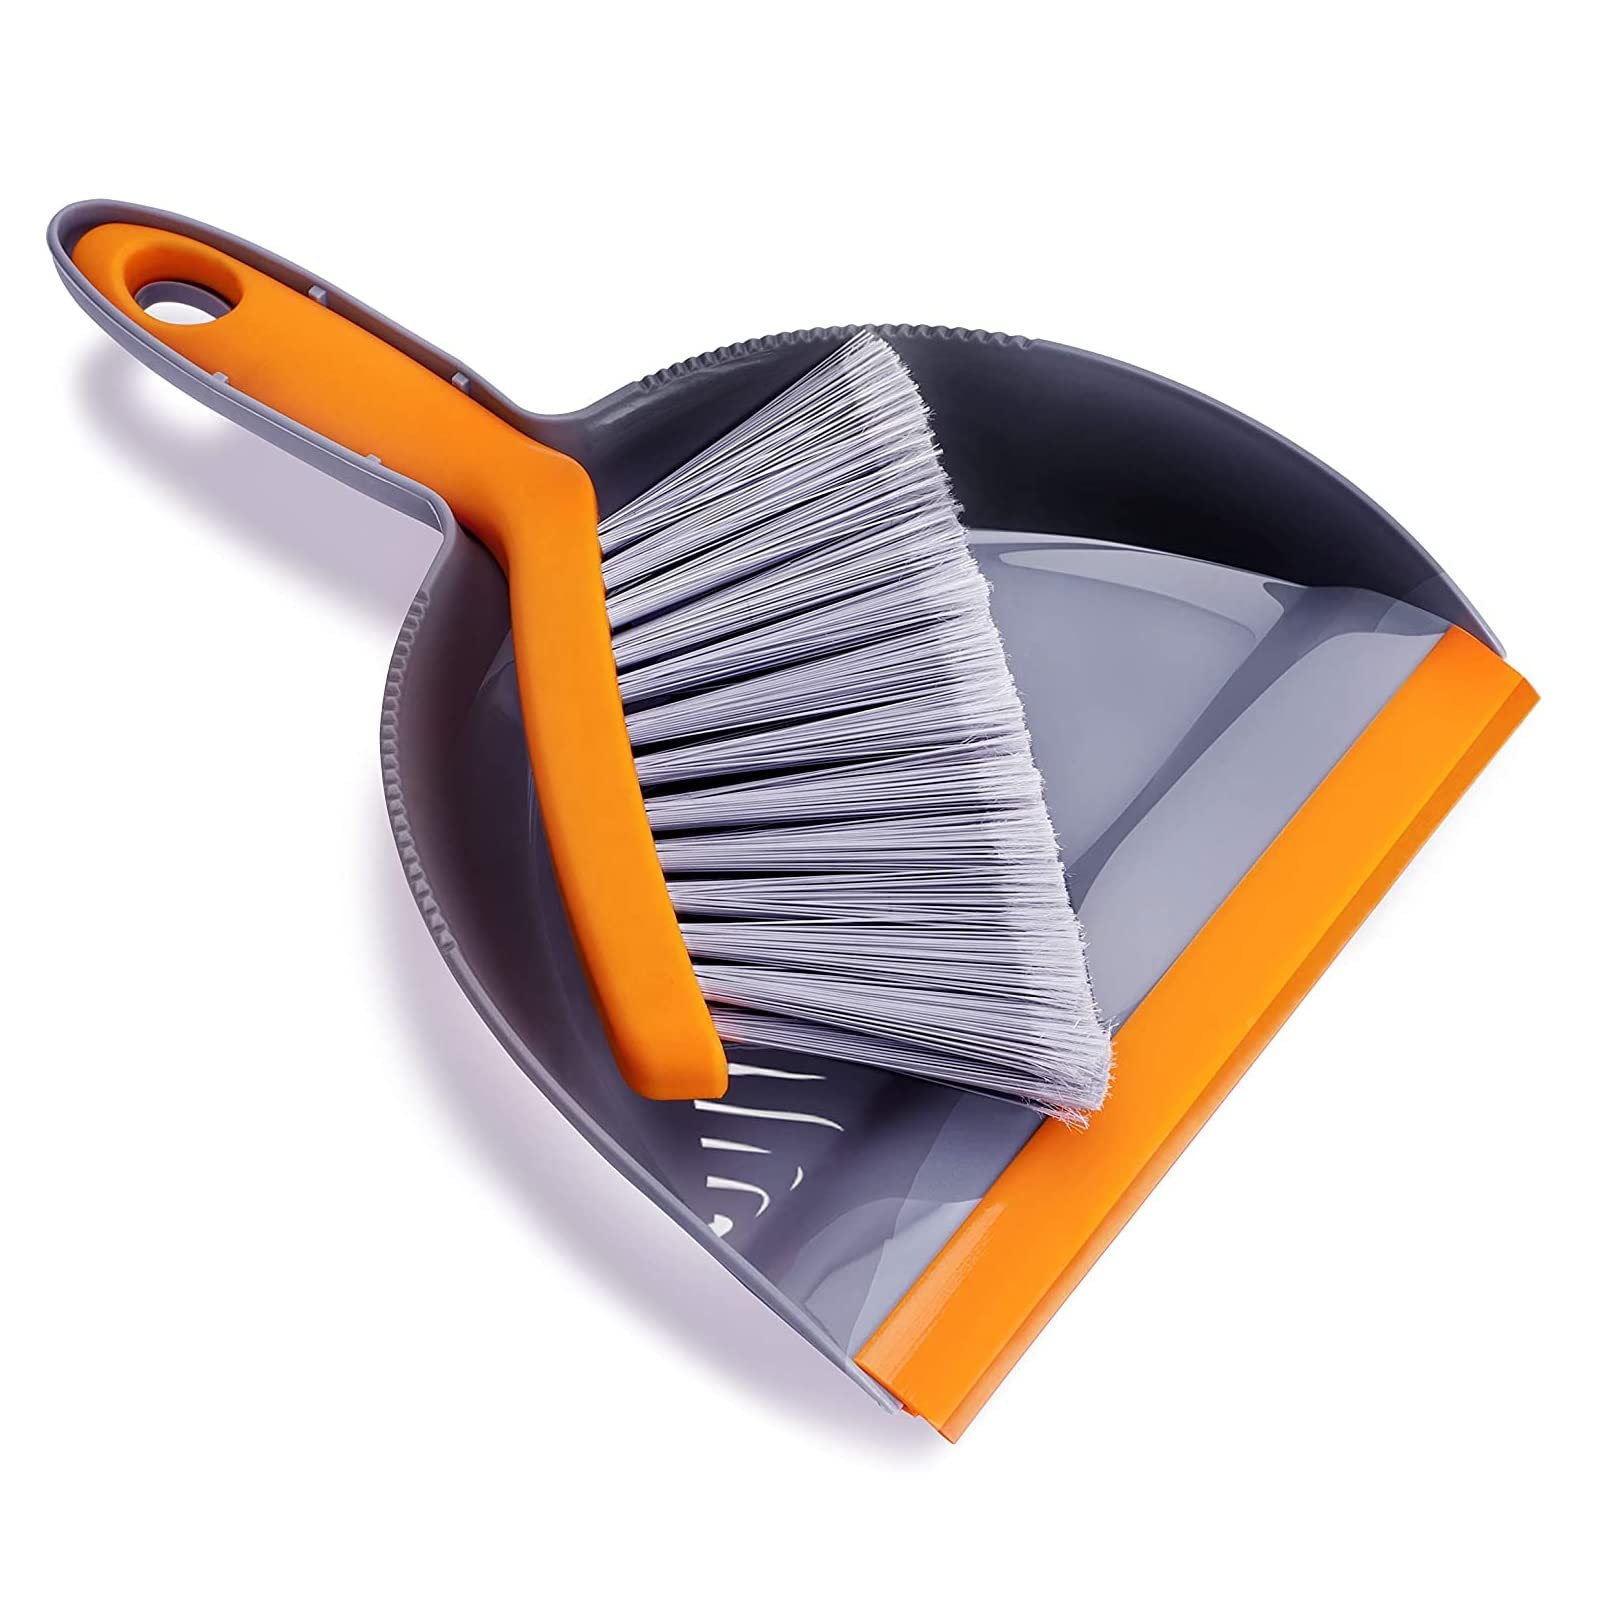 15 Incredible Small Broom And Dustpan for 2023